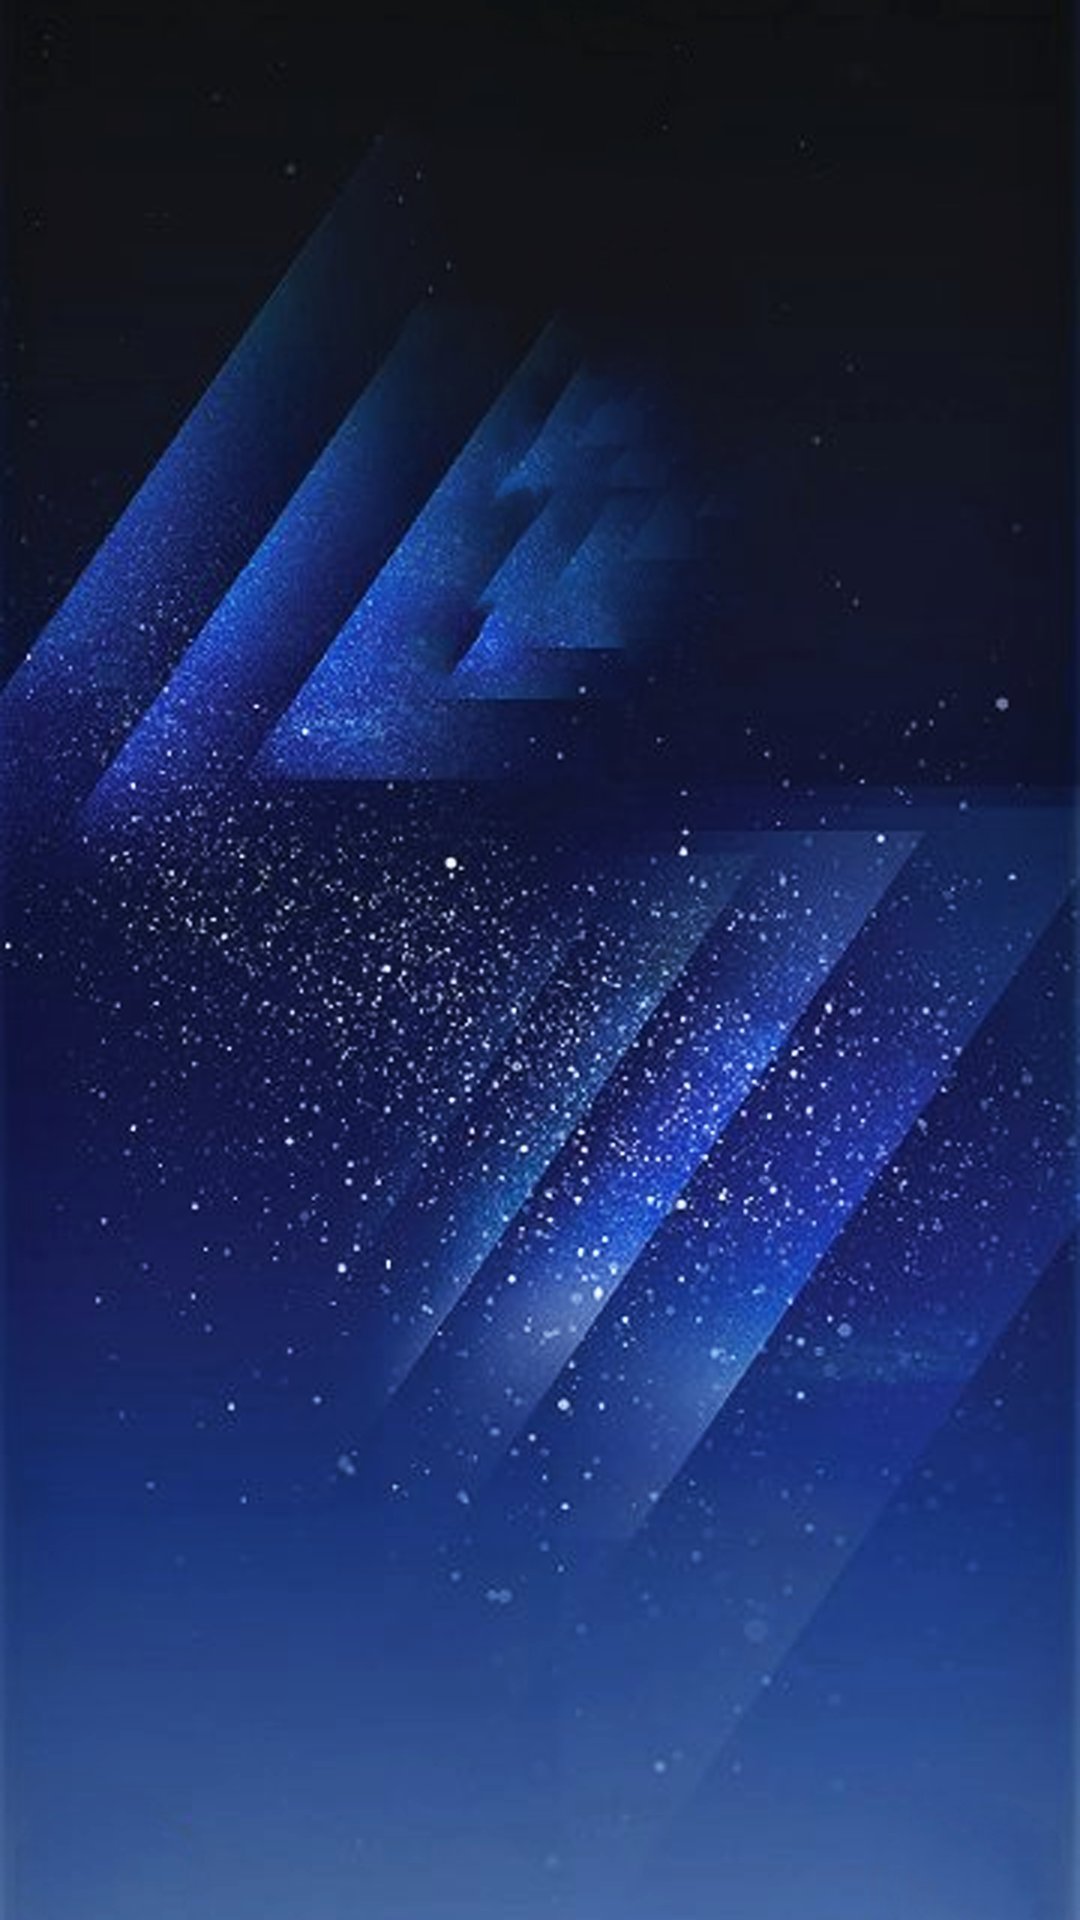 Samsung Galaxy S8 stock wallpapers are here, or are they ...